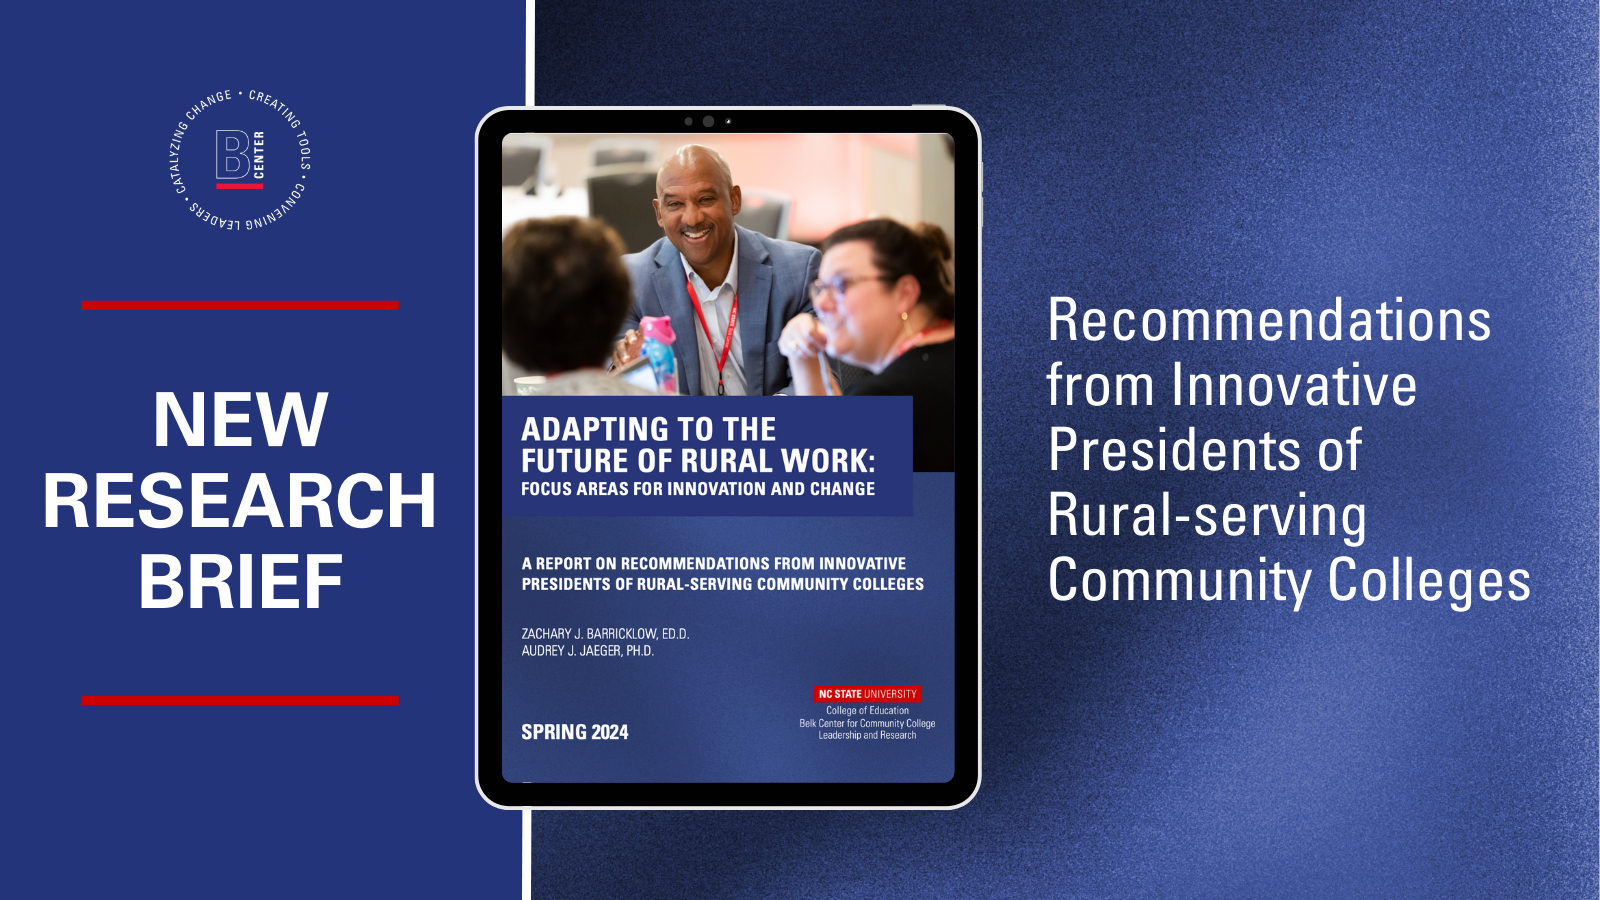 Image for Belk Center New Research Brief titled Recommendations from Innovative Presidents of Rural-Serving Community Colleges